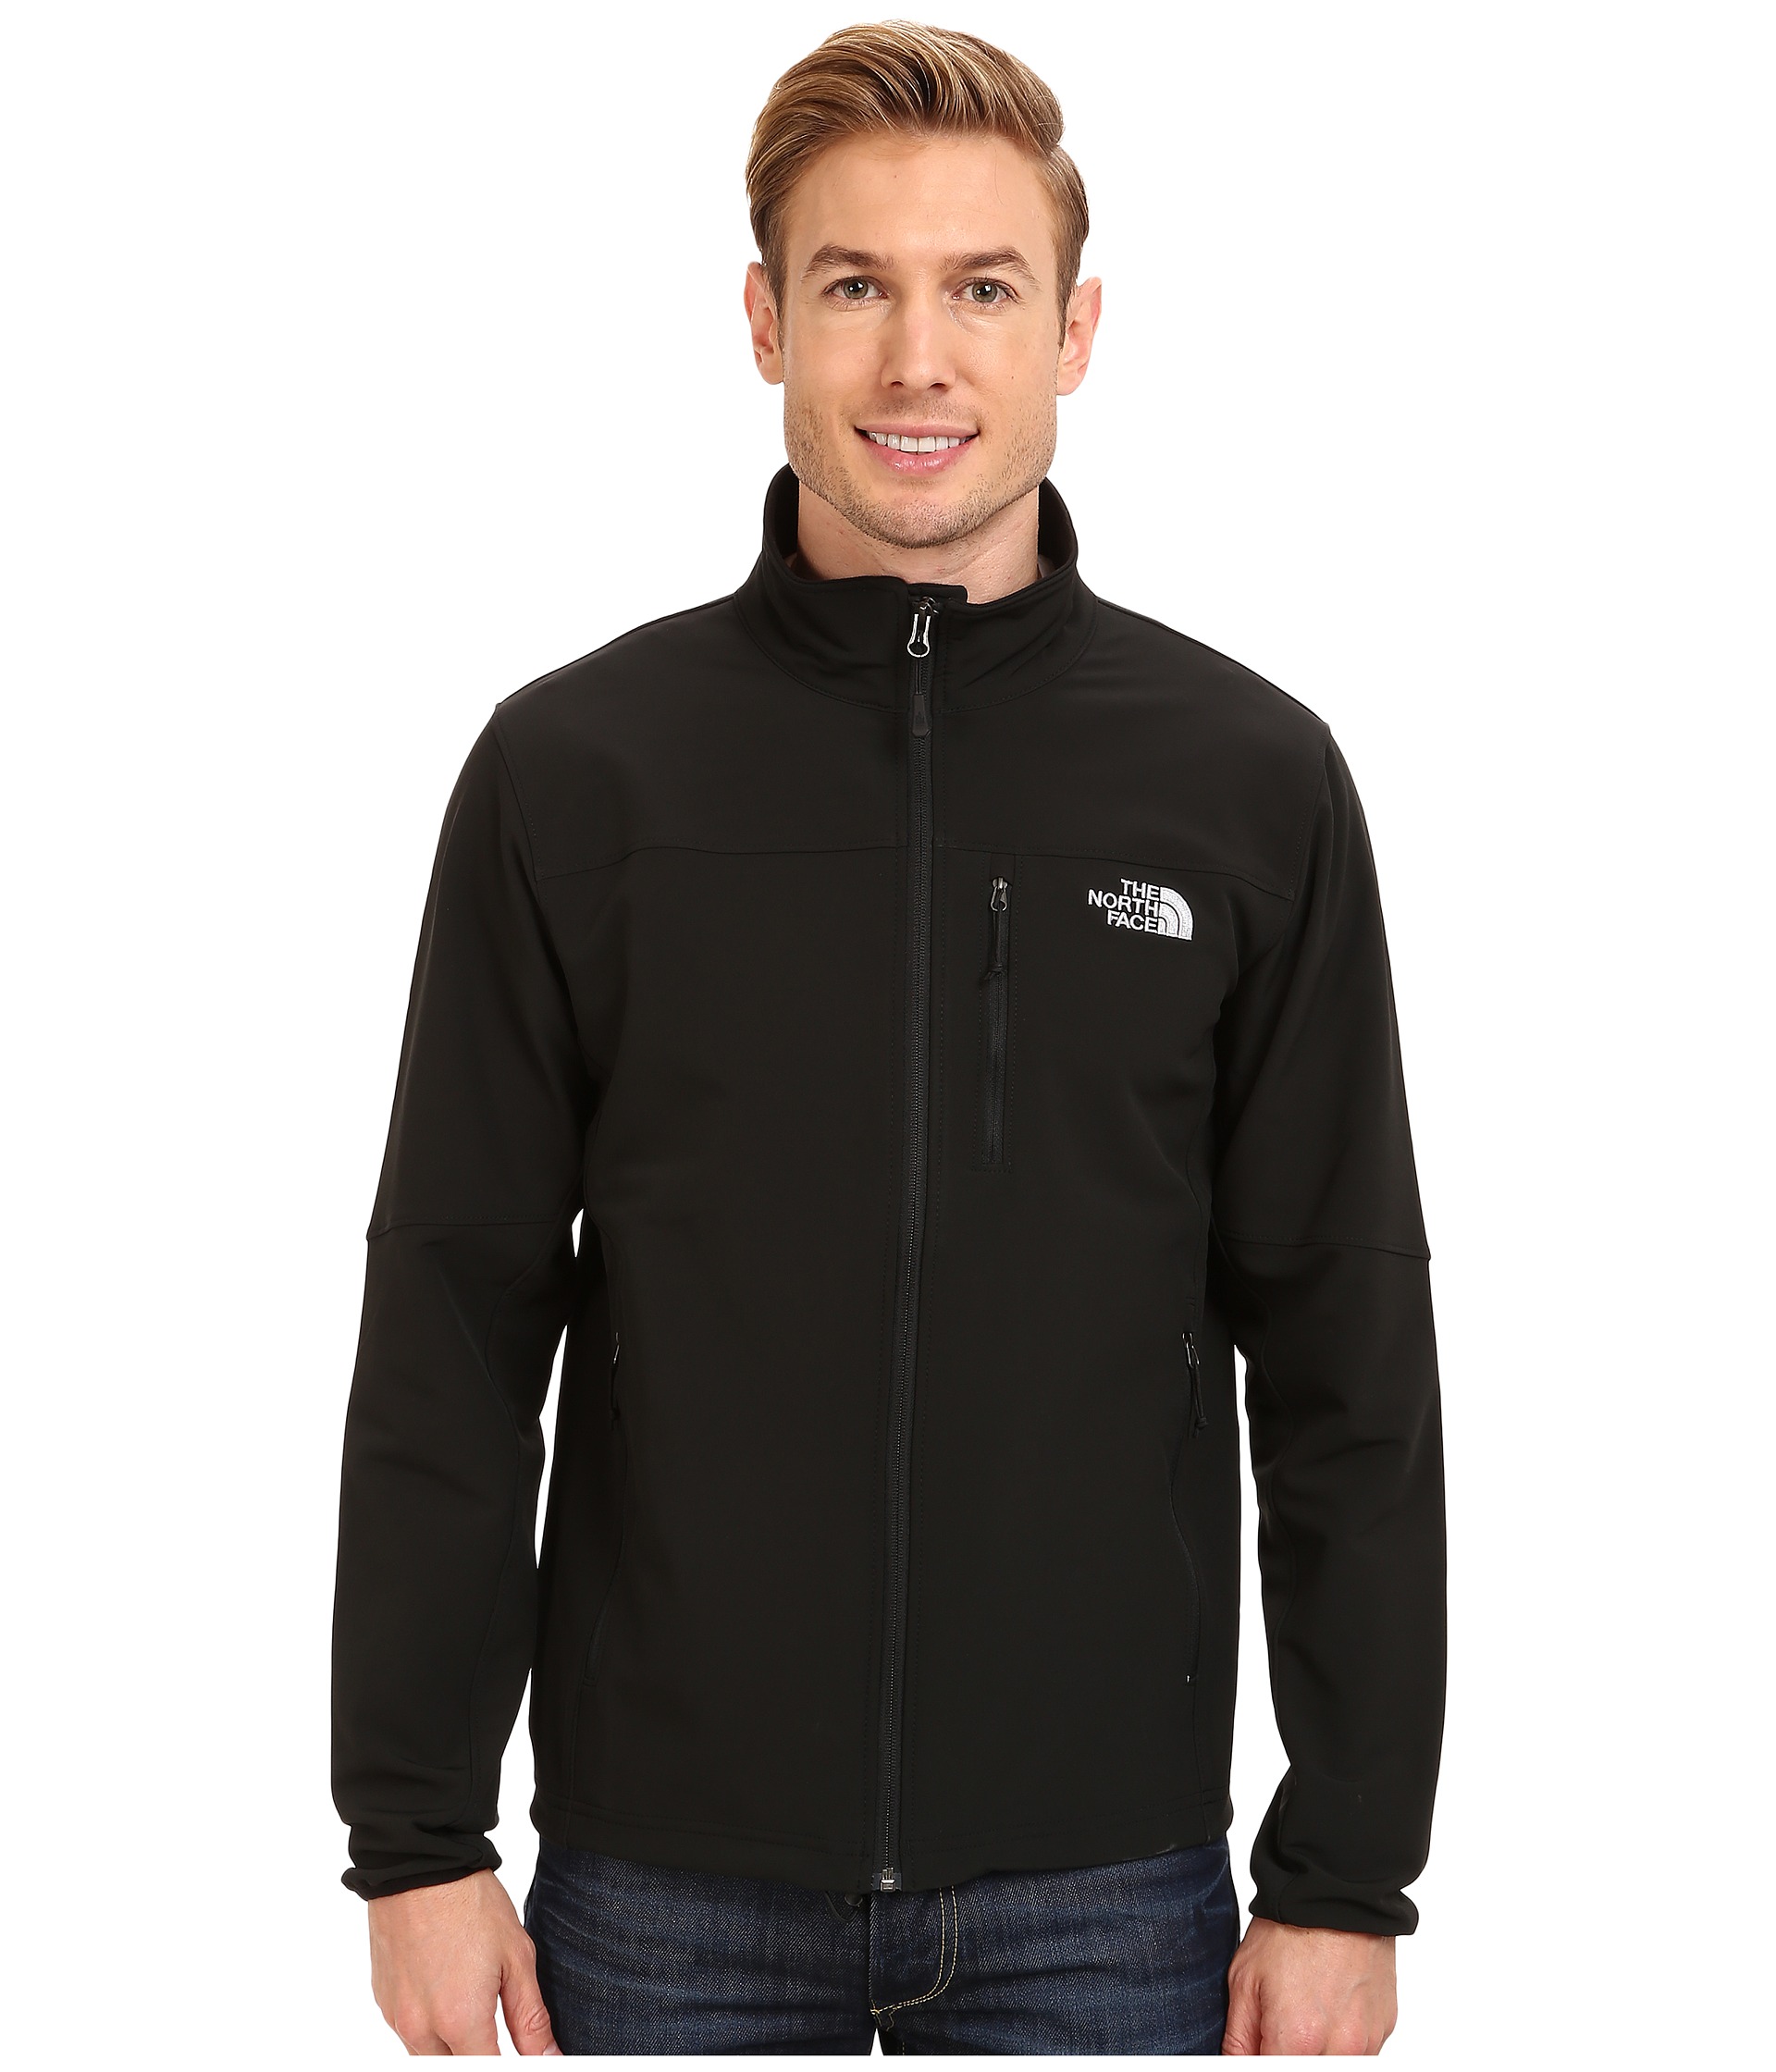 The North Face Apex Pneumatic Jacket - Zappos.com Free Shipping BOTH Ways